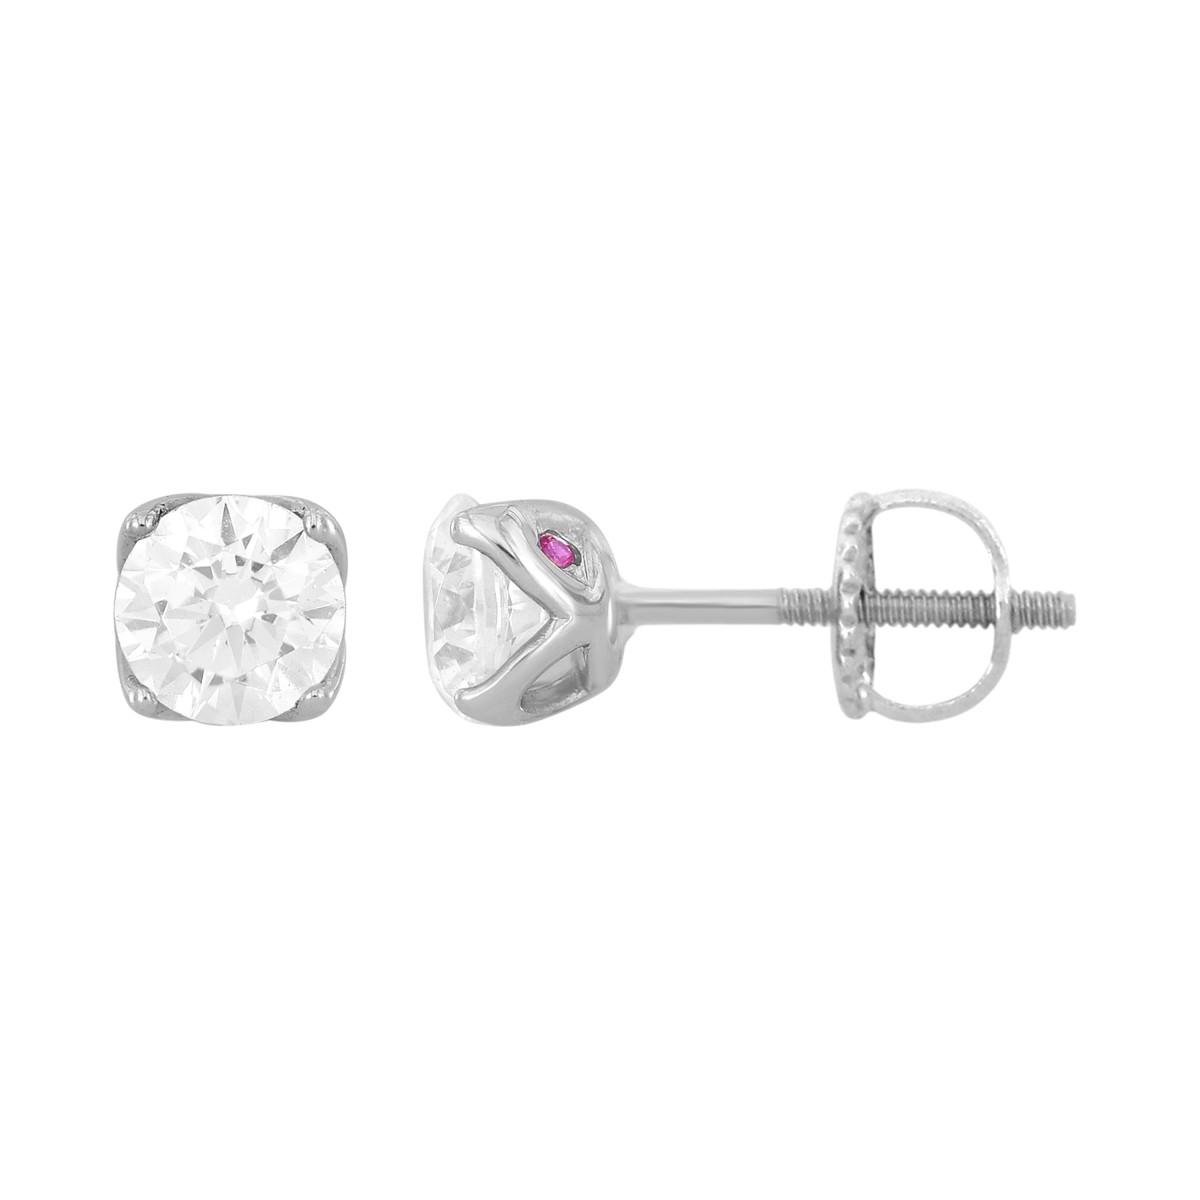 14K WHITE GOLD 1CT ROUND DIAMOND LADIES SOLITAIRE EARRINGS 